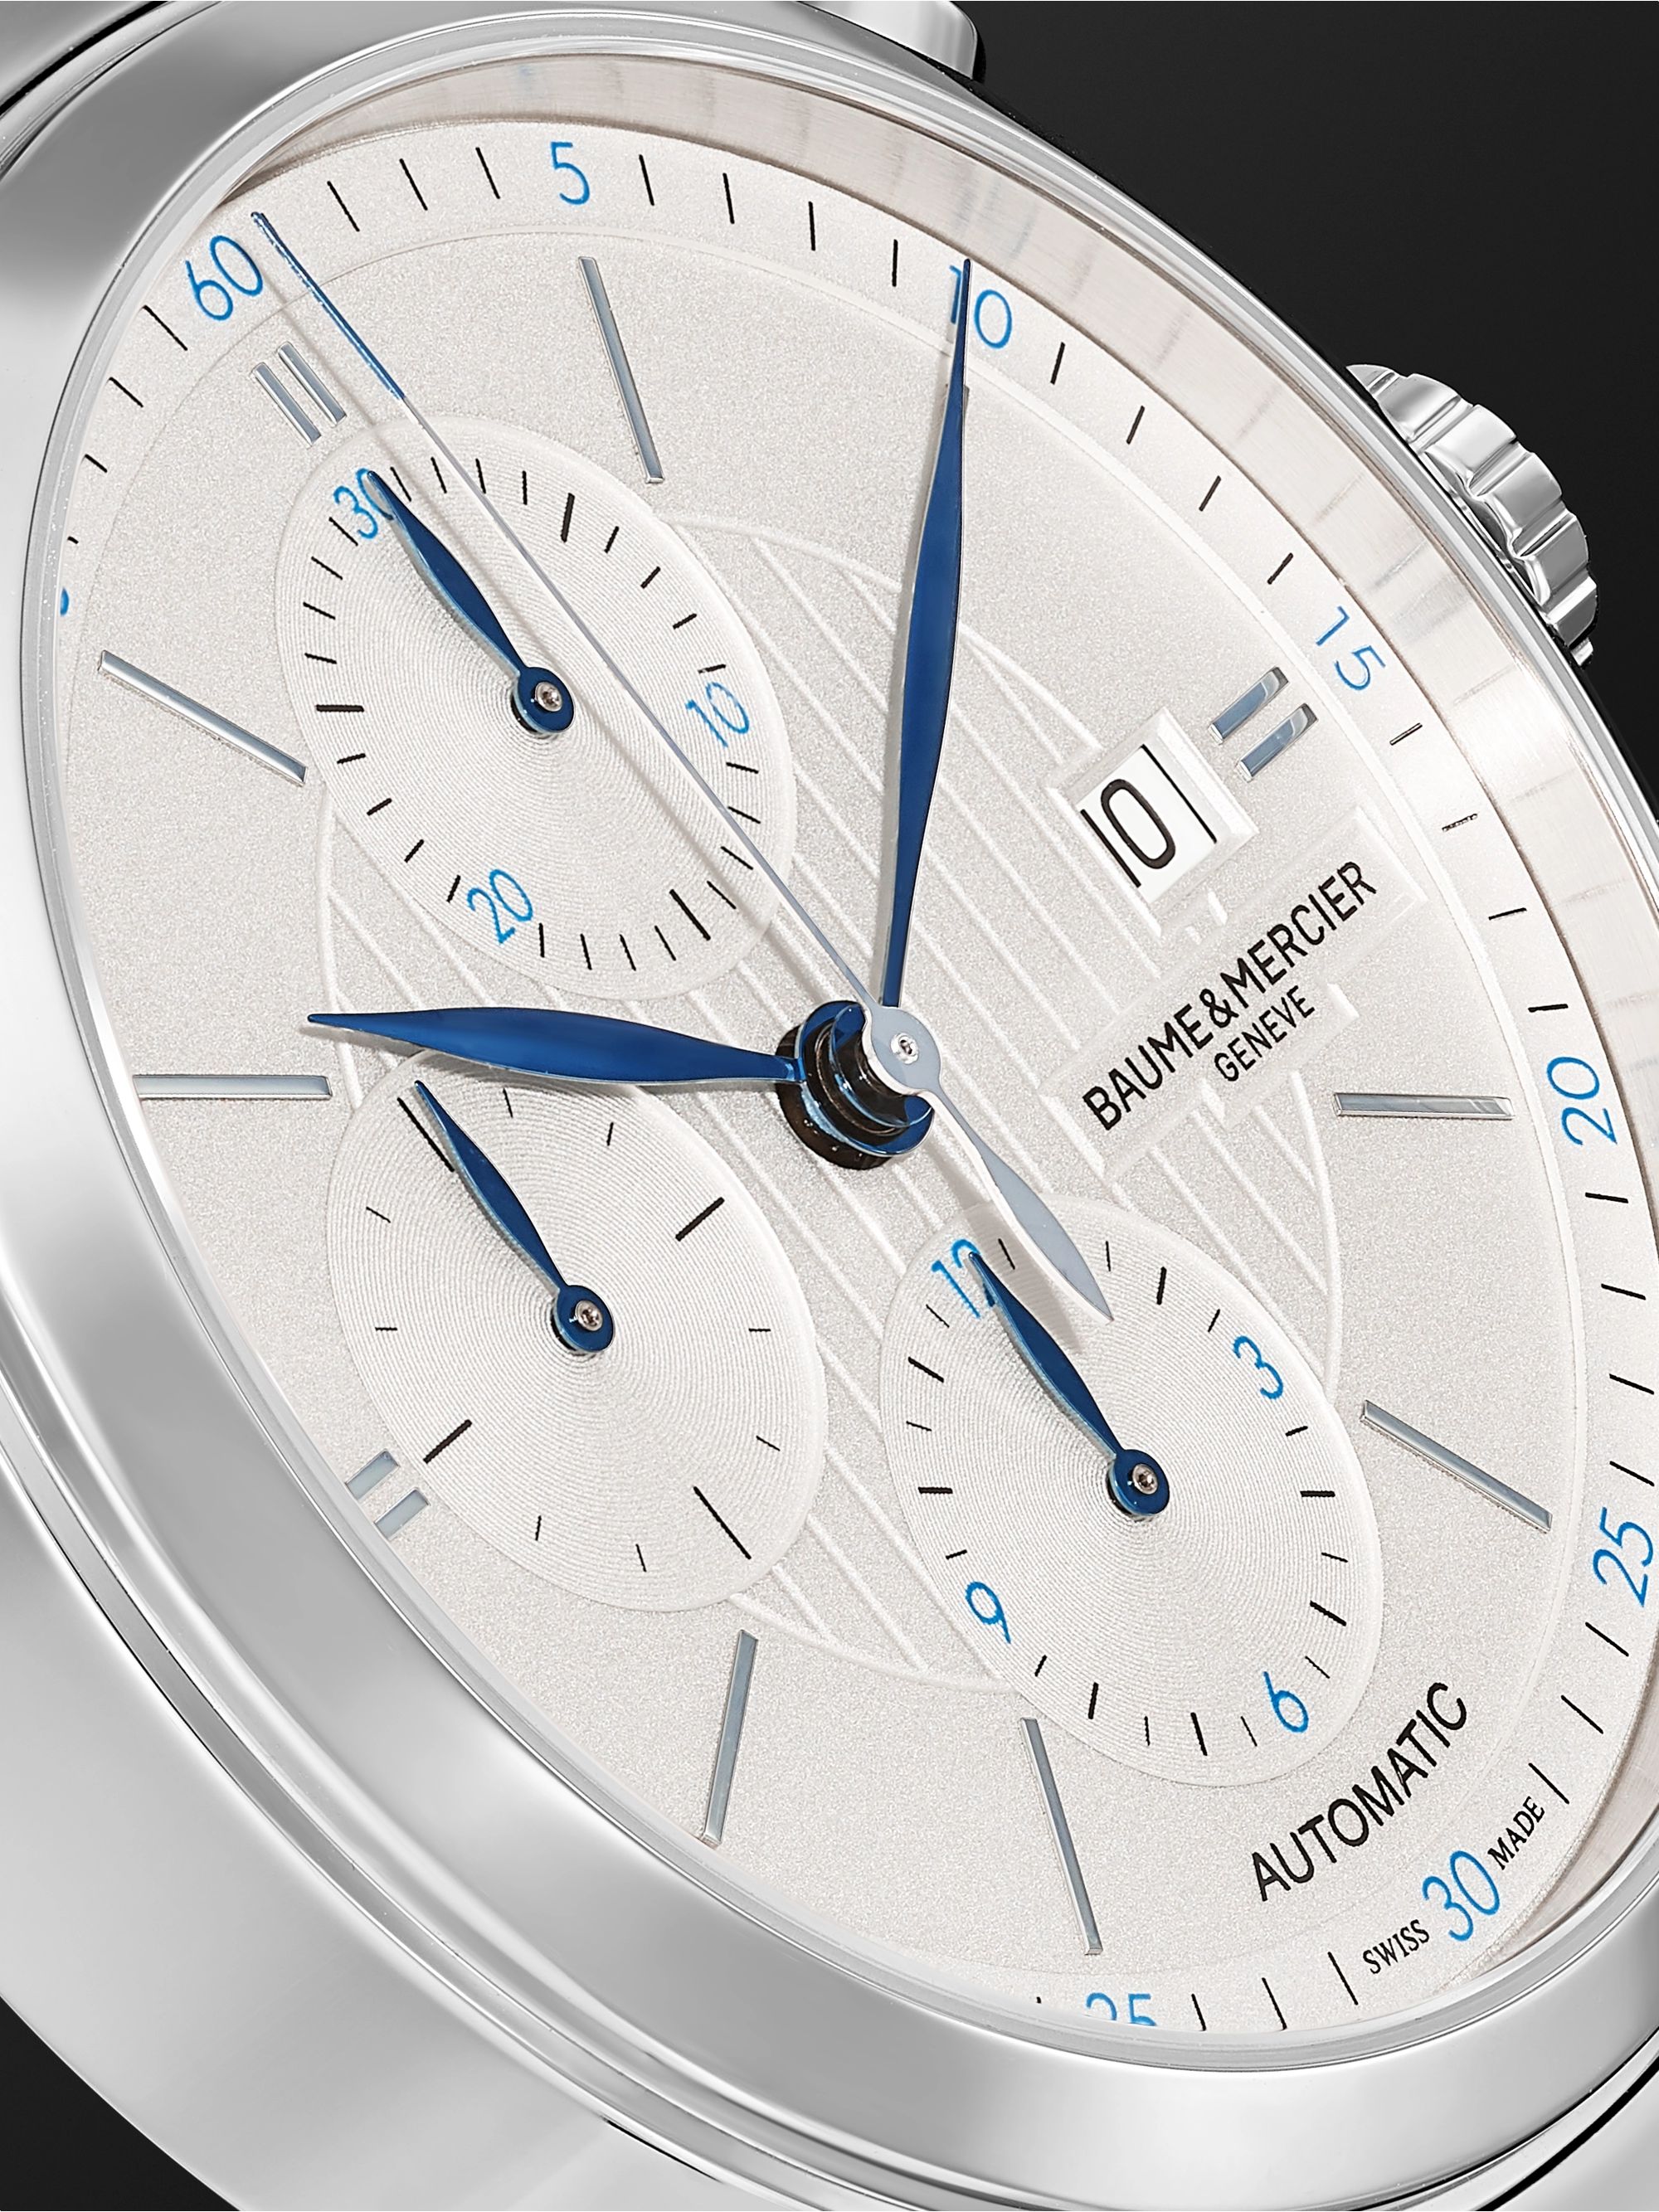 BAUME & MERCIER Classima Automatic Chronograph 42mm Stainless Steel Watch, Ref. No. M0A10331